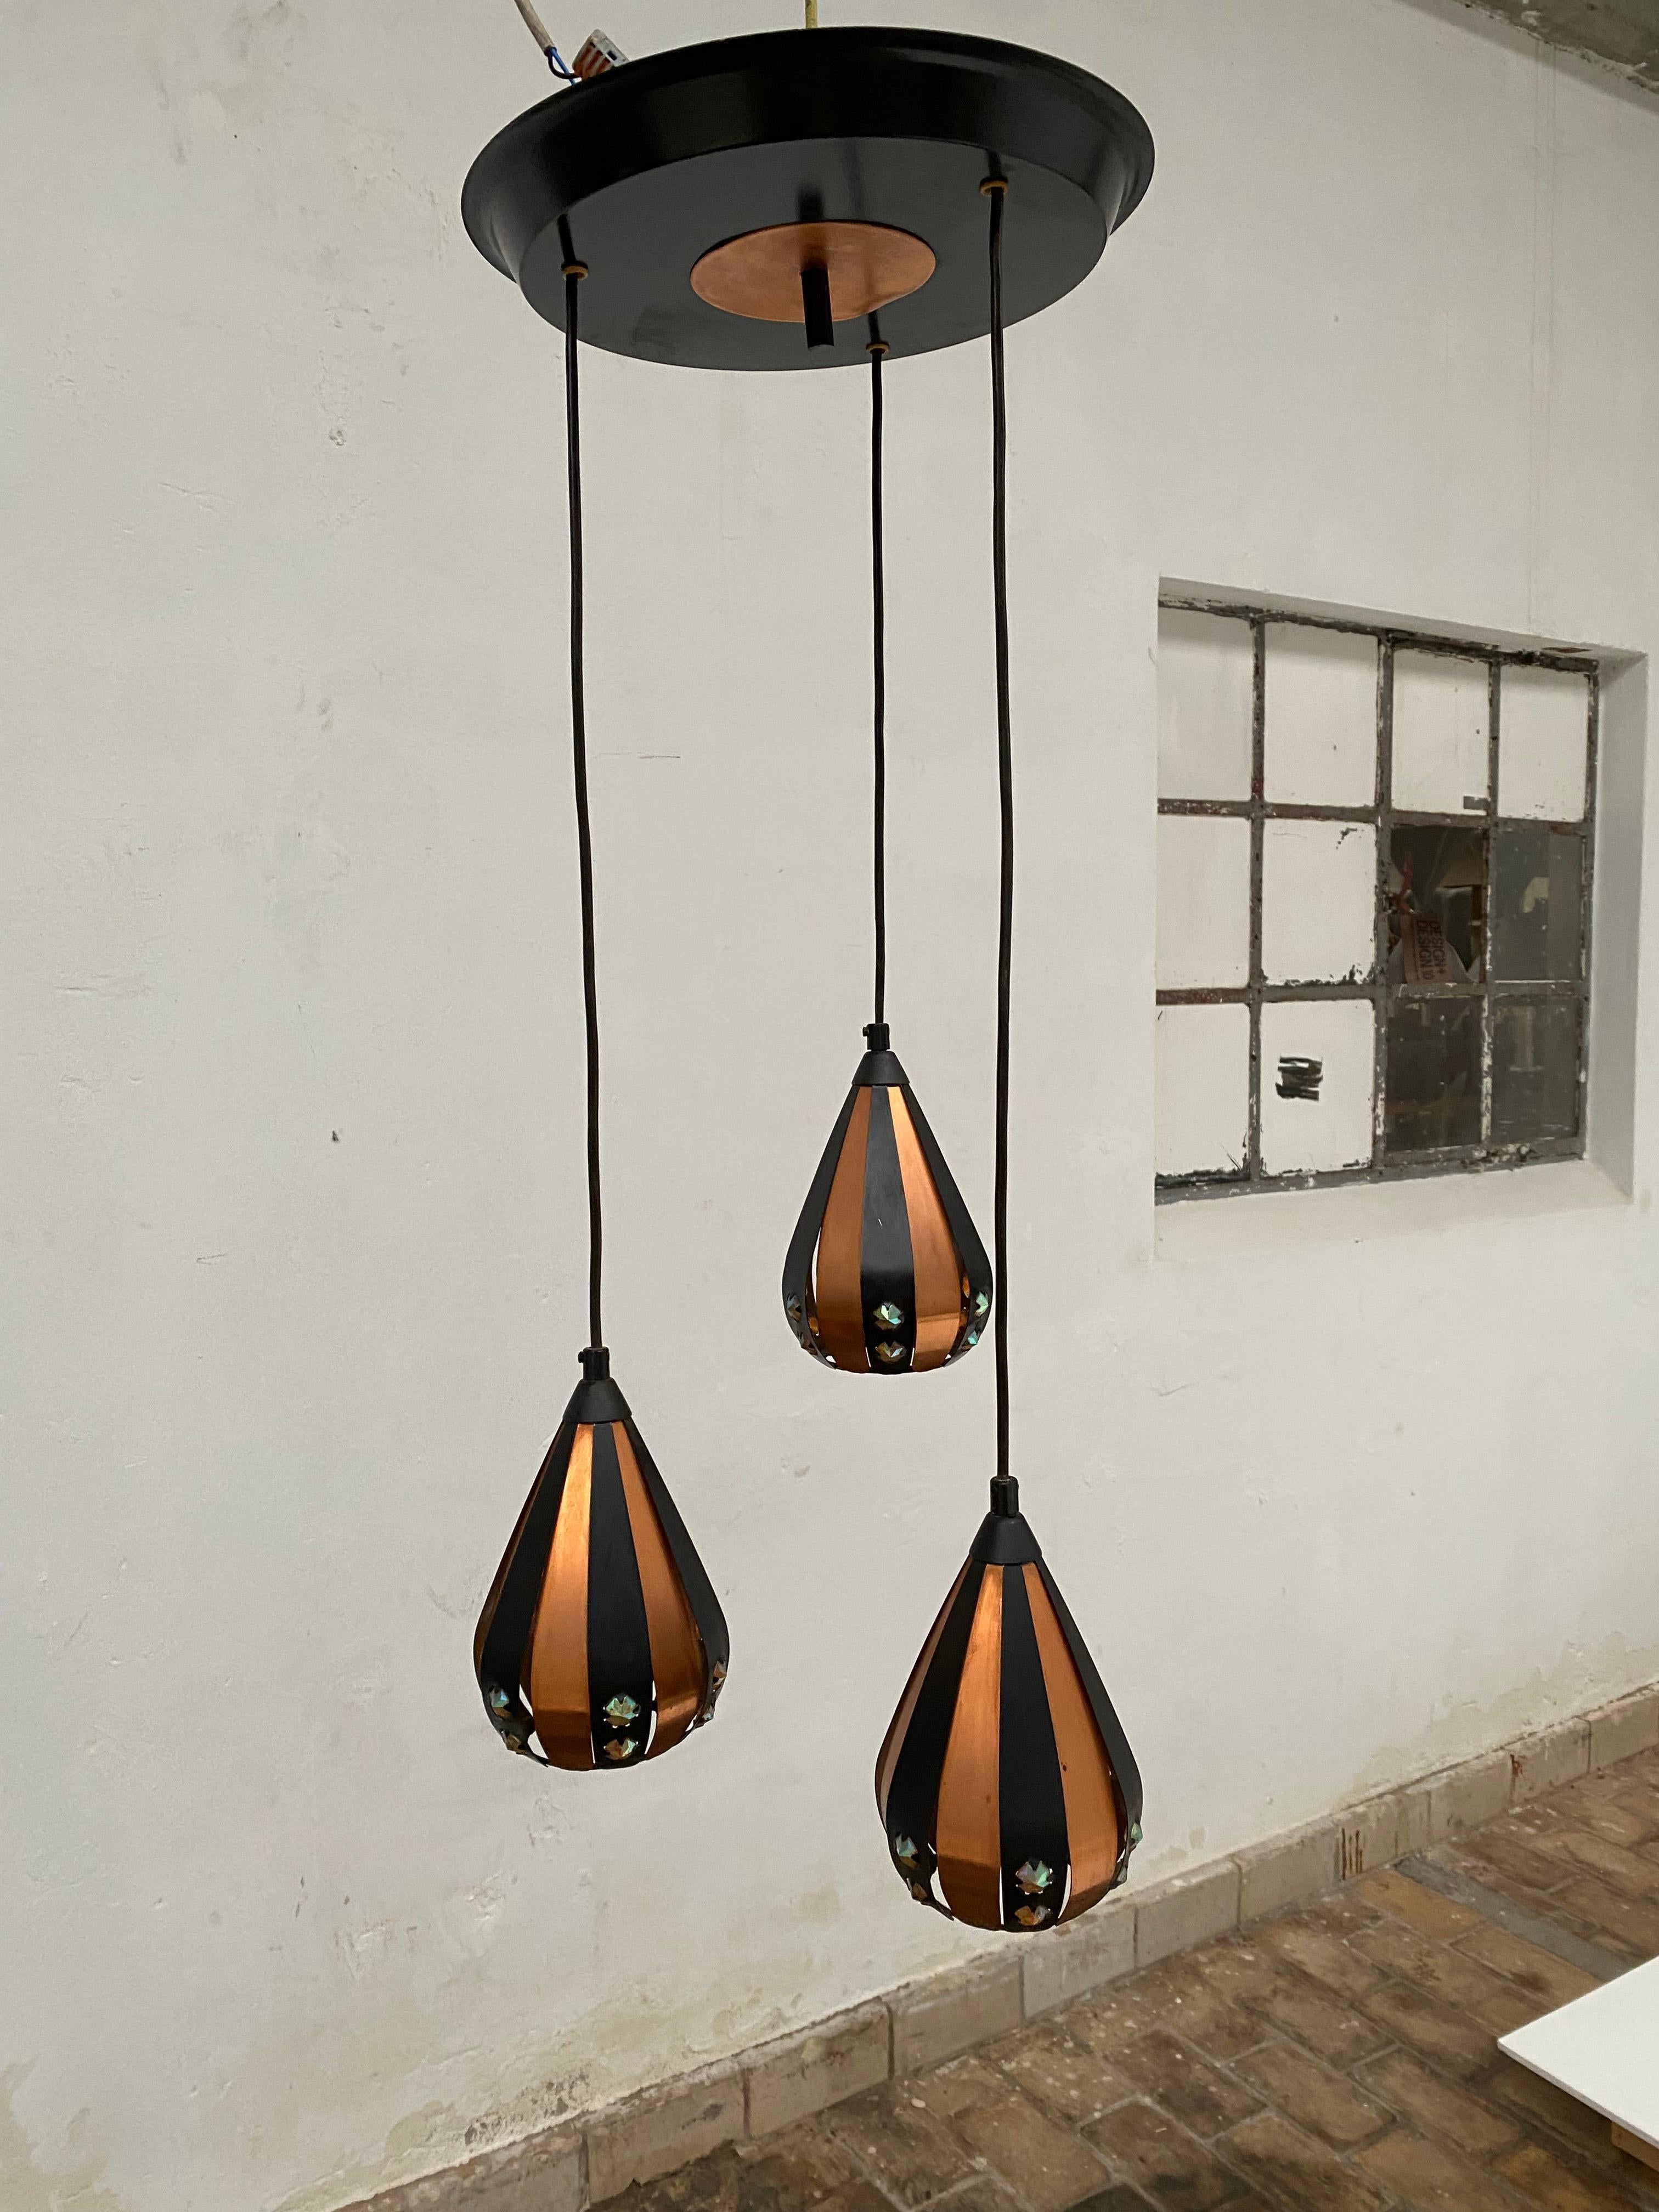 3 Droplet Pendant Chandelier by Werner Schou for Coronell Electrical Denmark  In Good Condition For Sale In bergen op zoom, NL